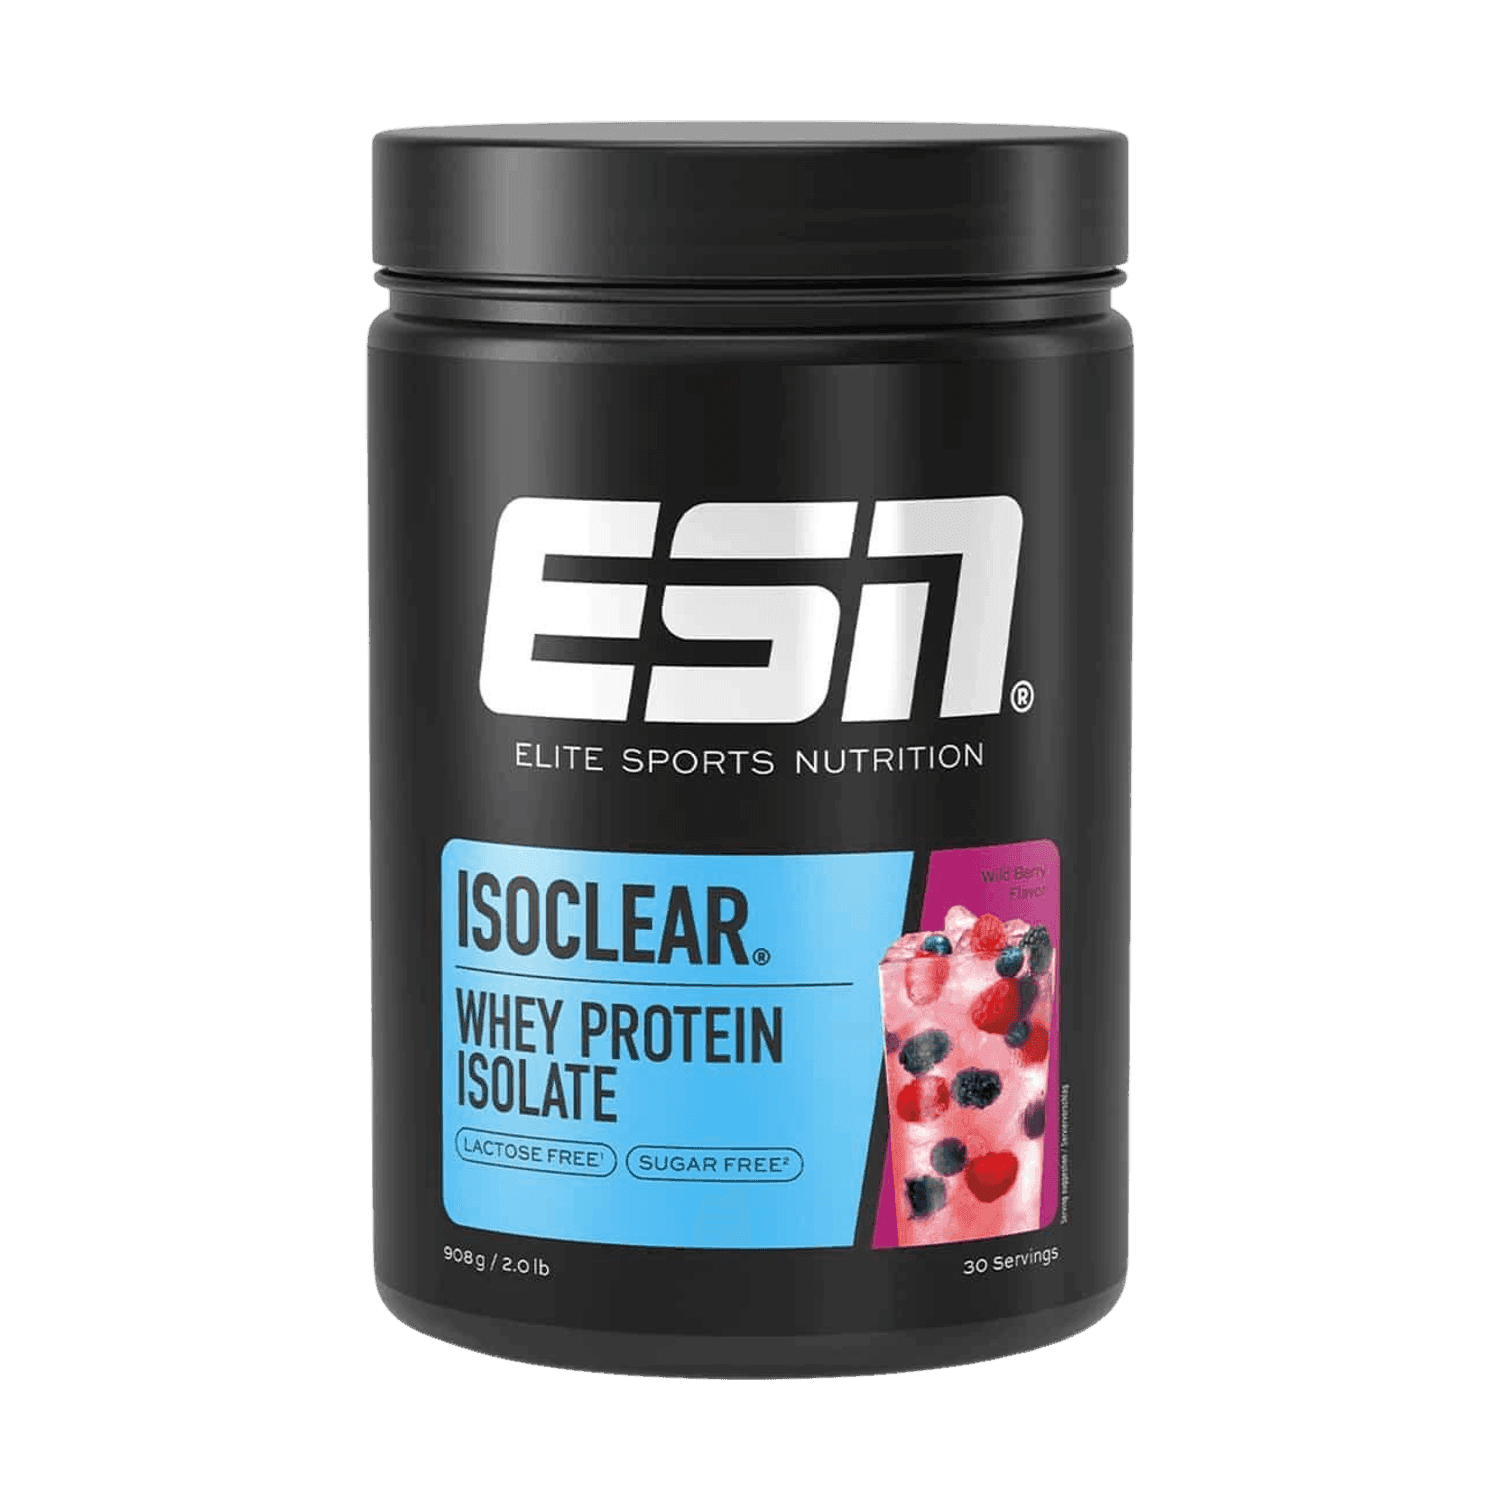 ESN ISOCLEAR Whey Isolate | 908g - Wild Berry - fitgrade.ch